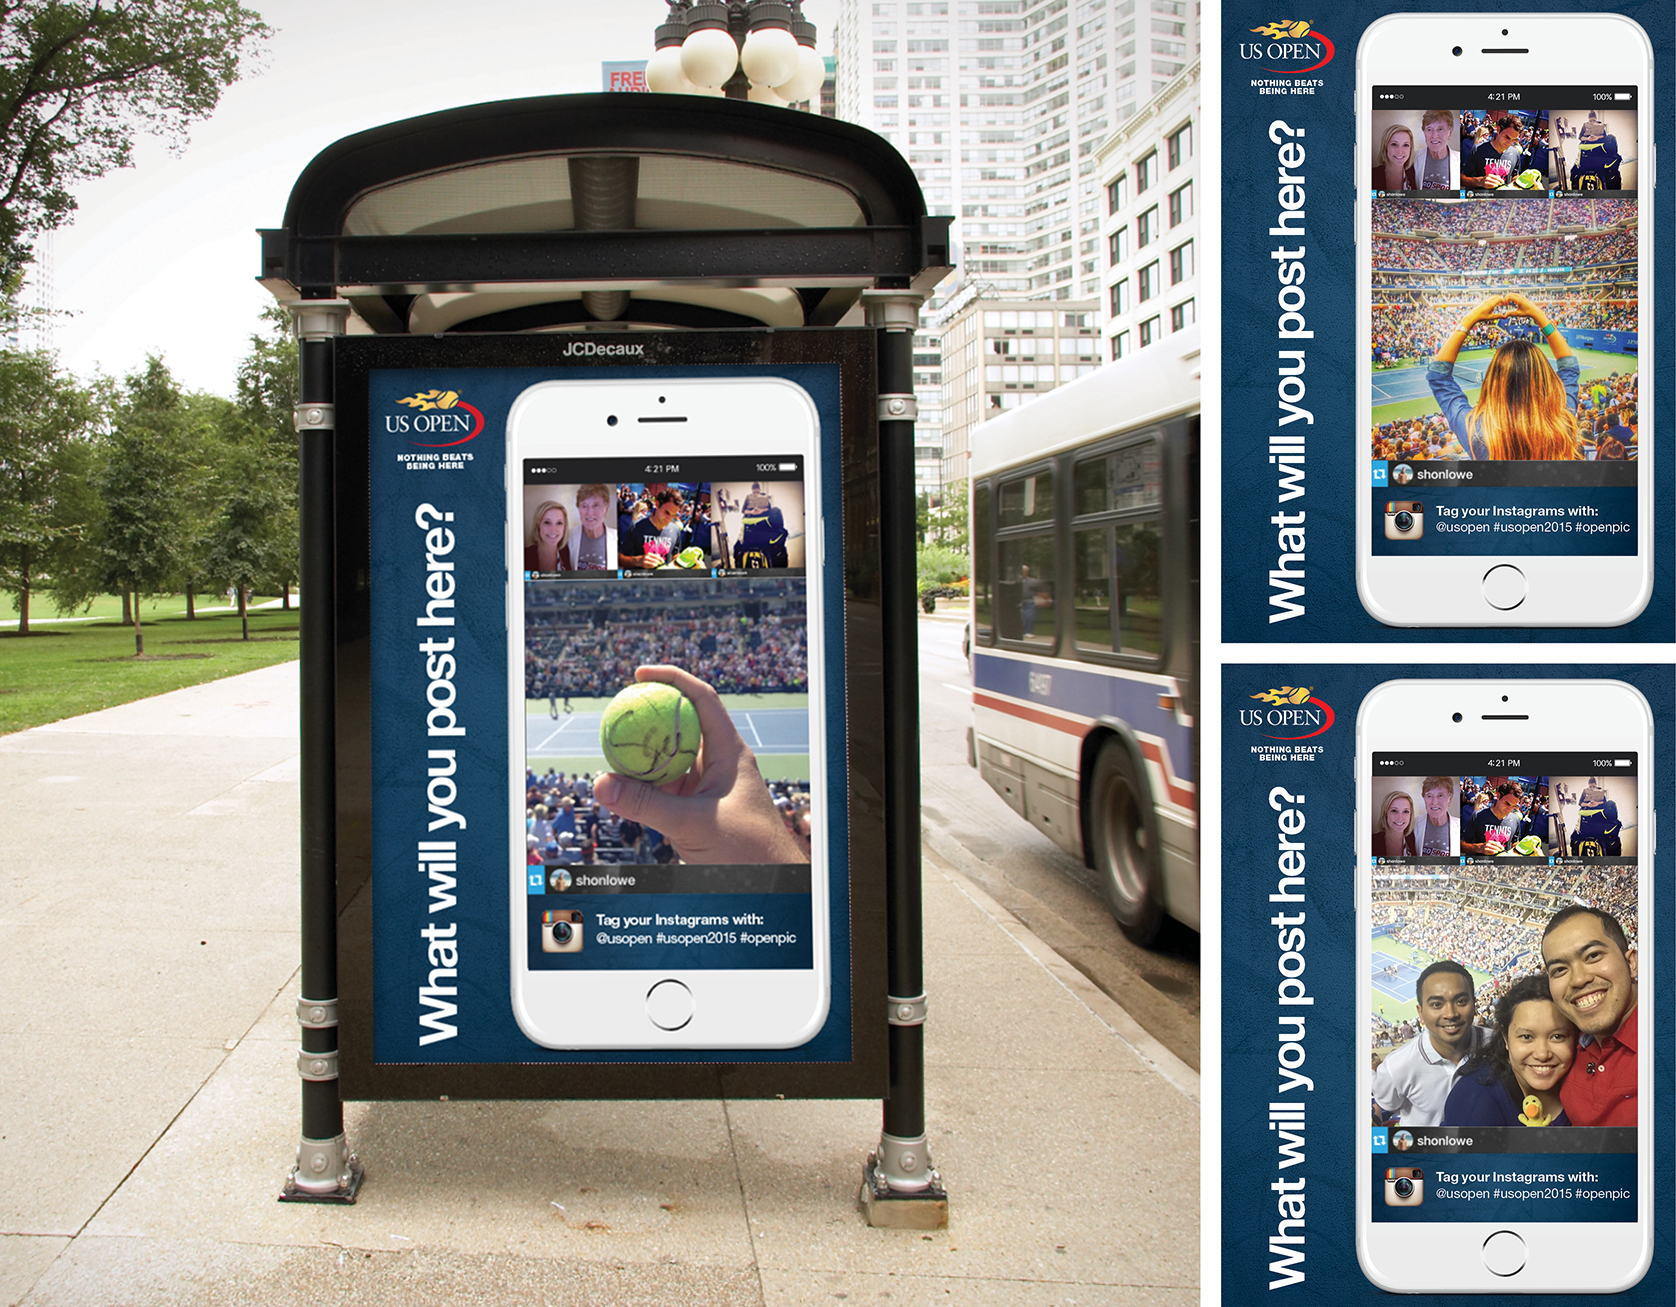 US Open 2015 Bus Shelter